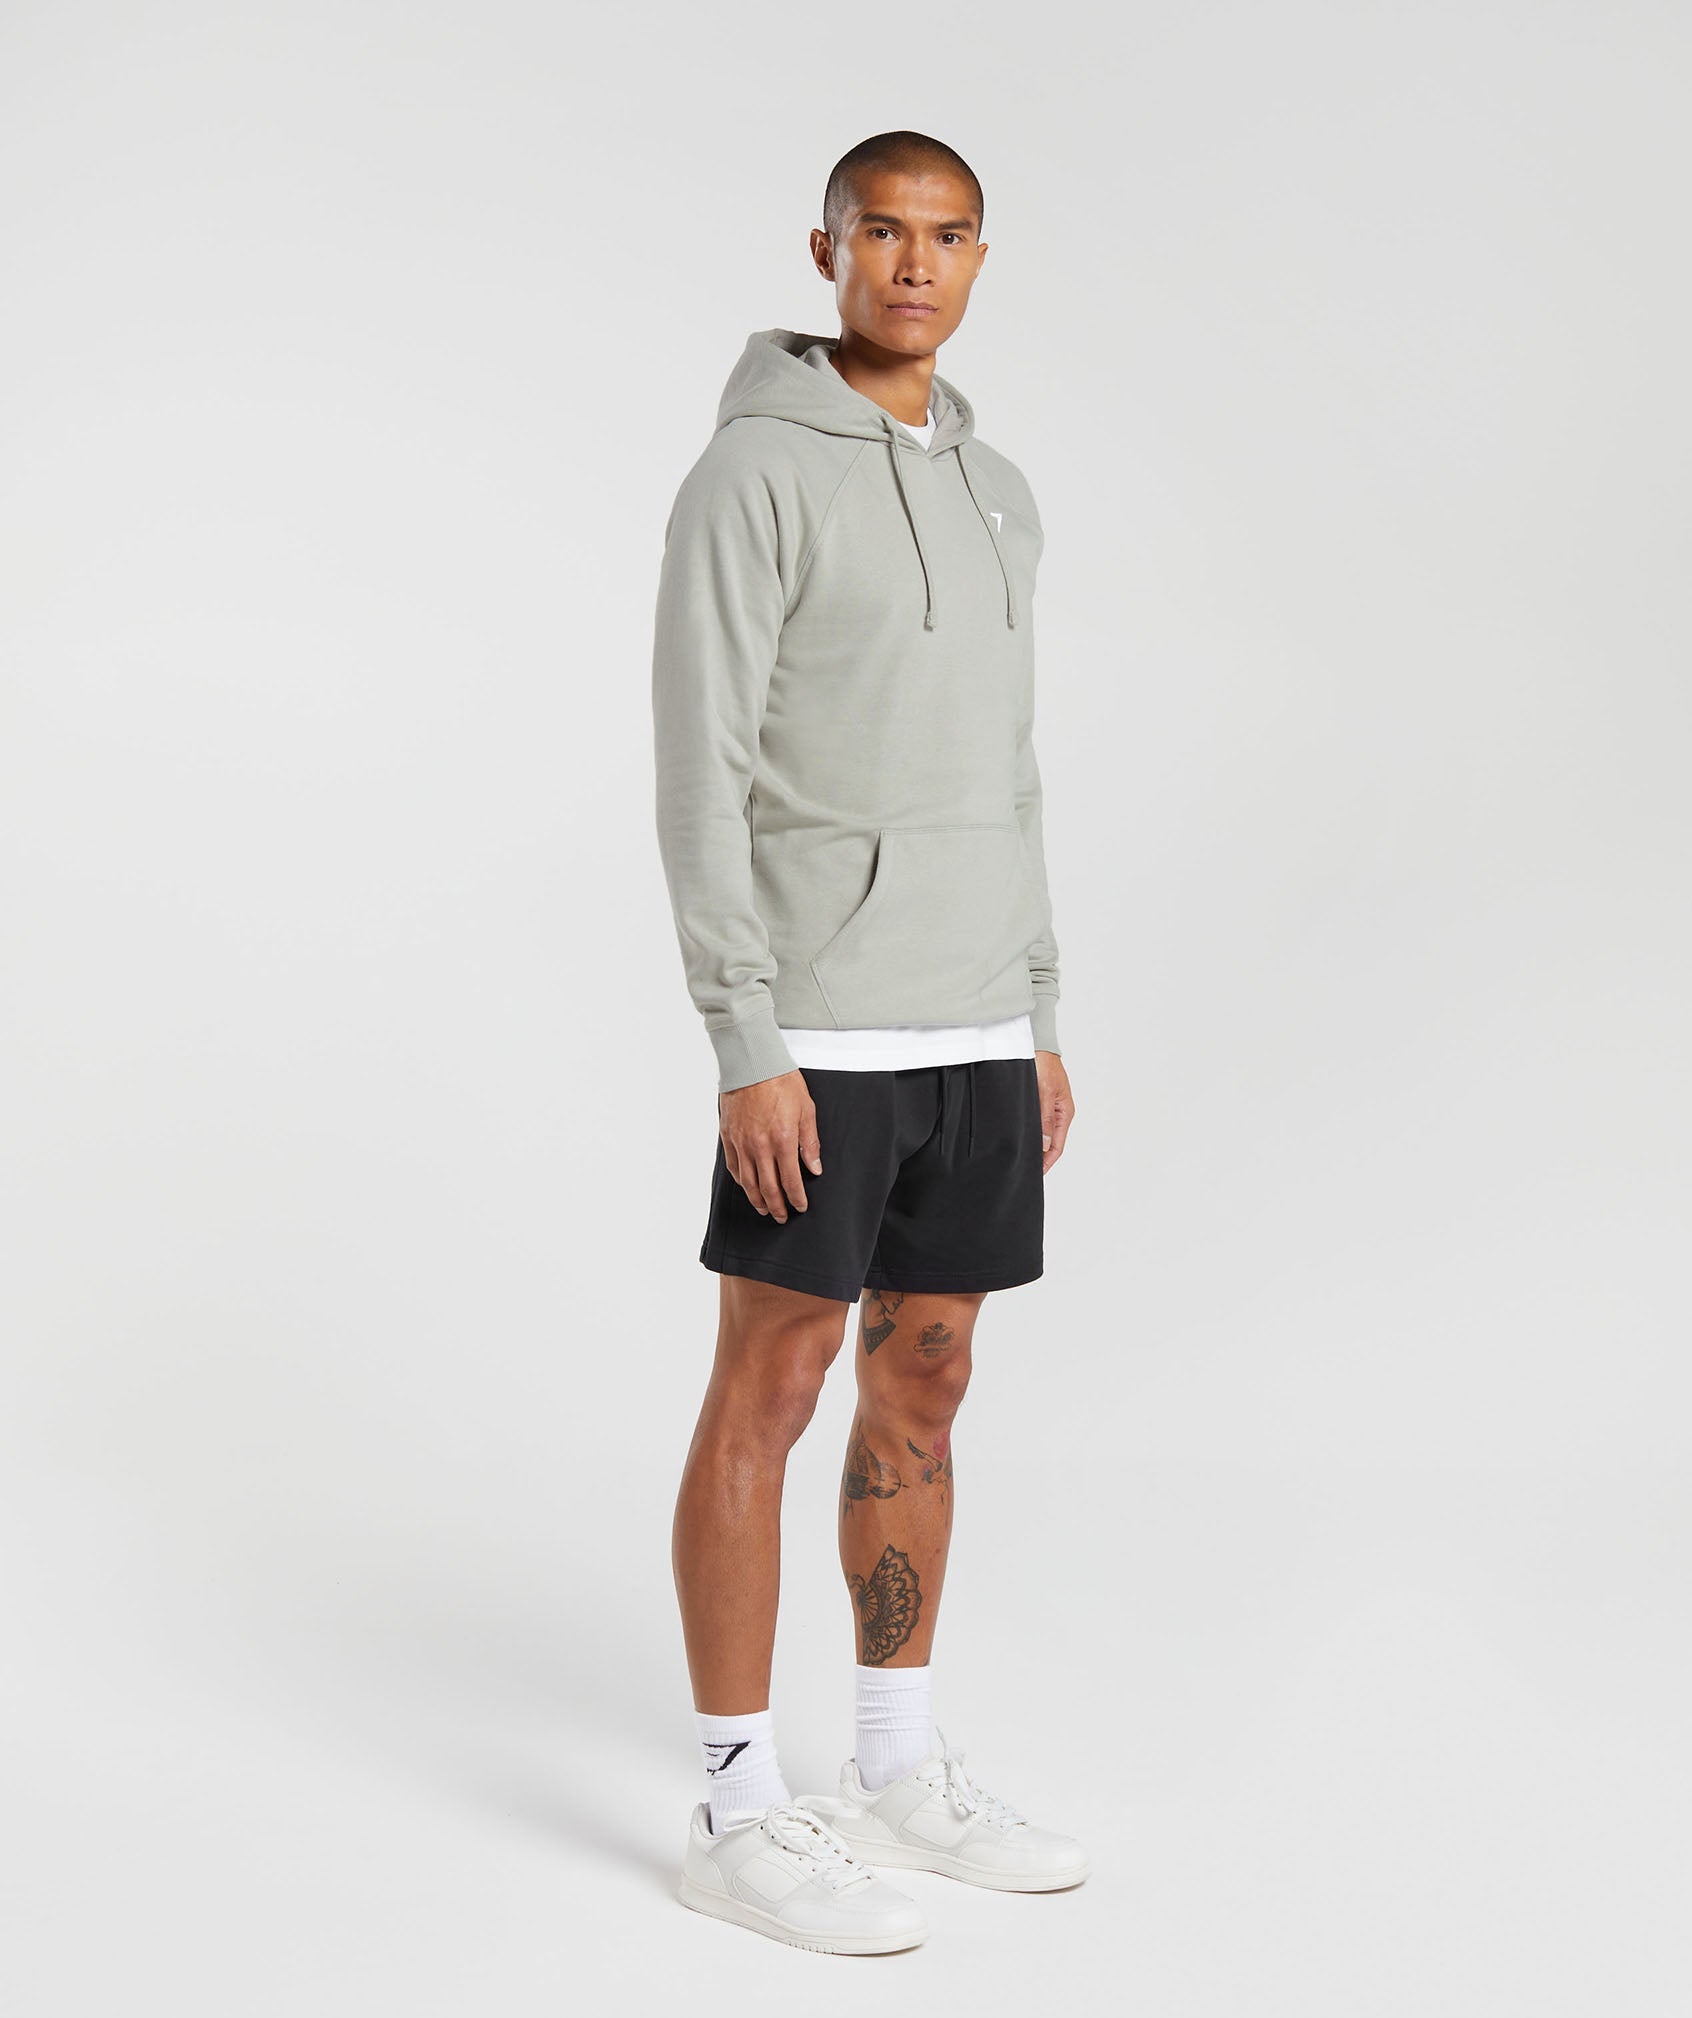 Crest Hoodie in Stone Grey - view 4